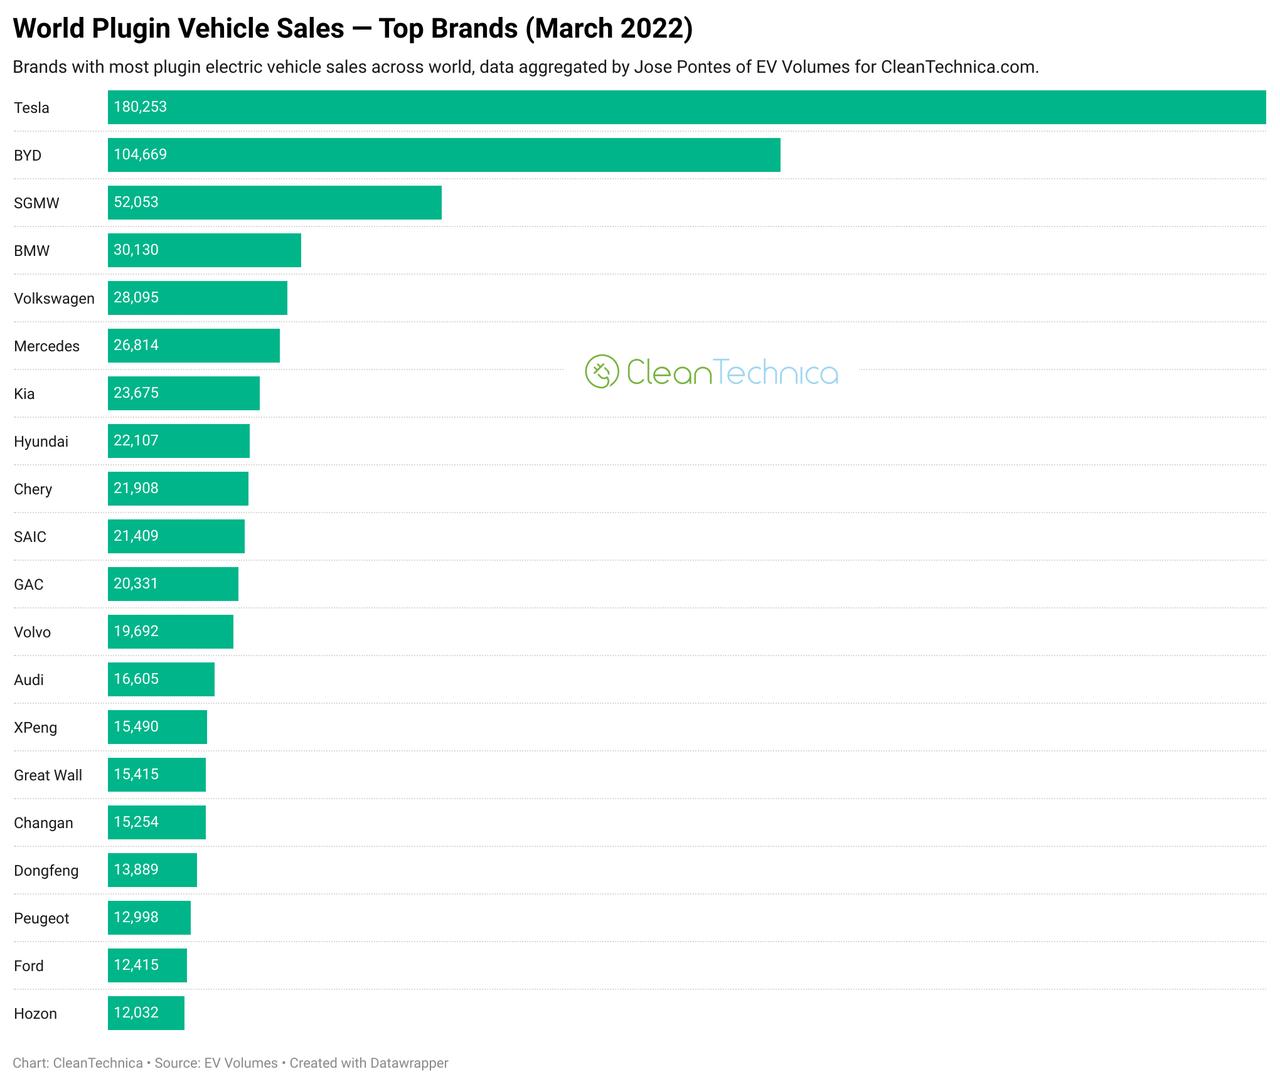 Global plugin electric car sales by brand for March 2022